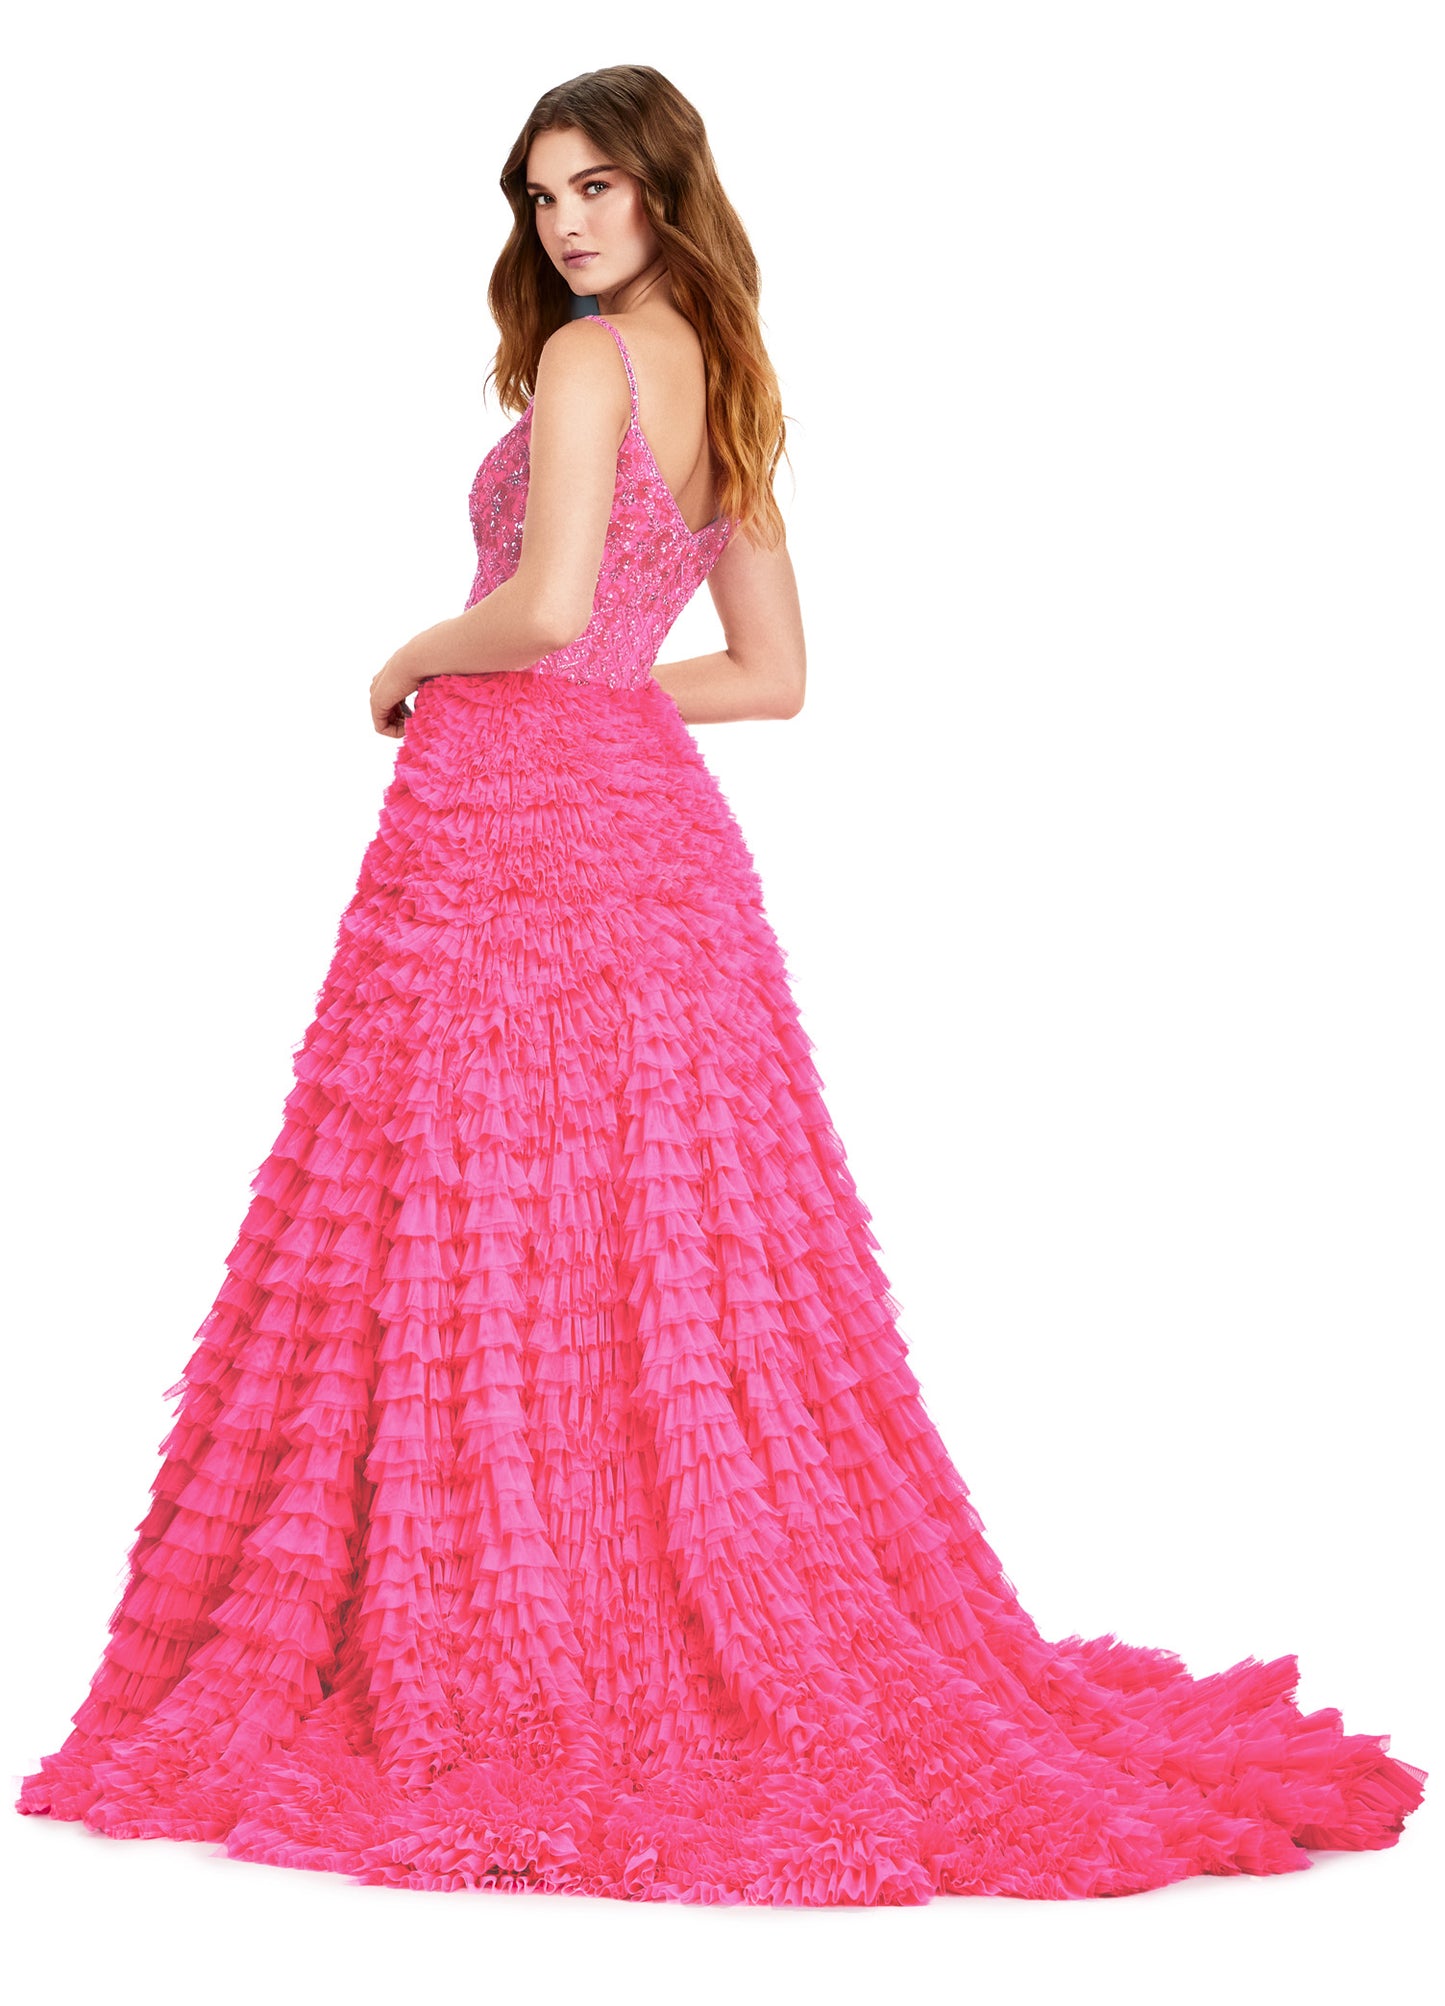 Make a statement in this Ashley Lauren 11427 long prom dress. The fully beaded bodice adds a touch of glamour while the layered tulle skirt creates volume and movement. Perfect for formal events and pageants, this ball gown will make you feel like a true queen. Turn heads in this gorgeous ball gown! With its fully beaded bodice and full layered tulle skirt, you'll feel like a queen!